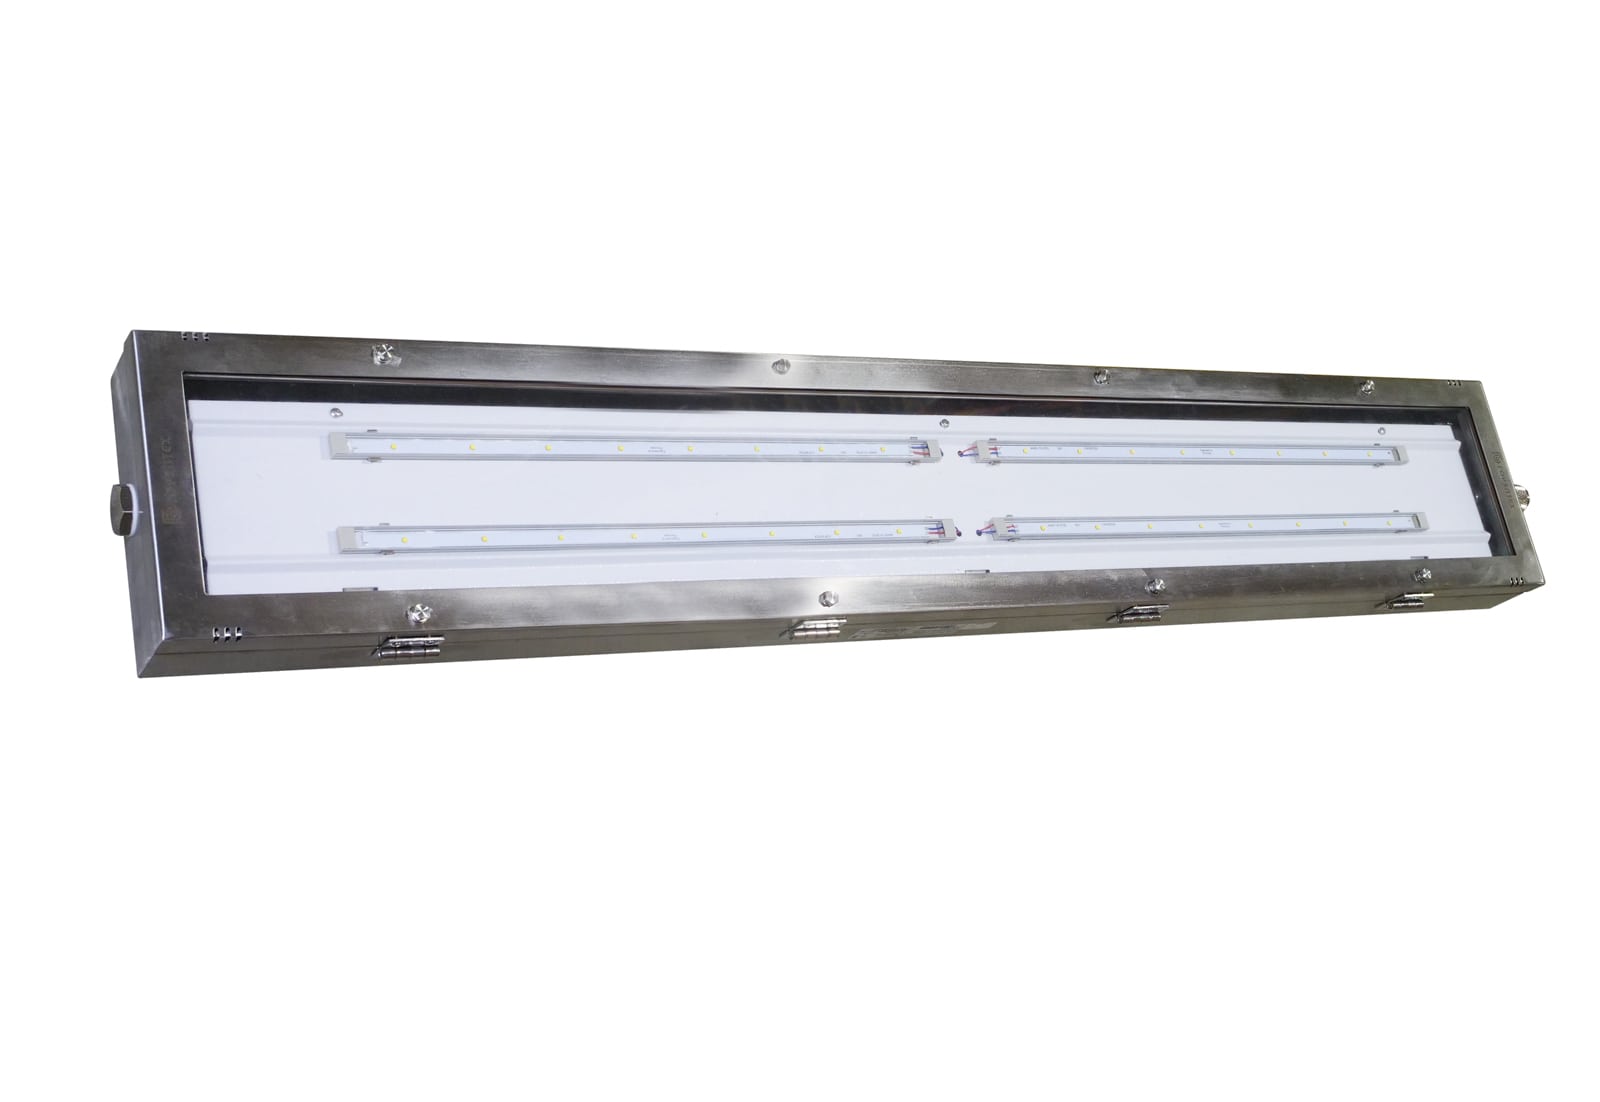 Explosion-proof linear LED light fixtures series SGL01...S/N made from stainless steel